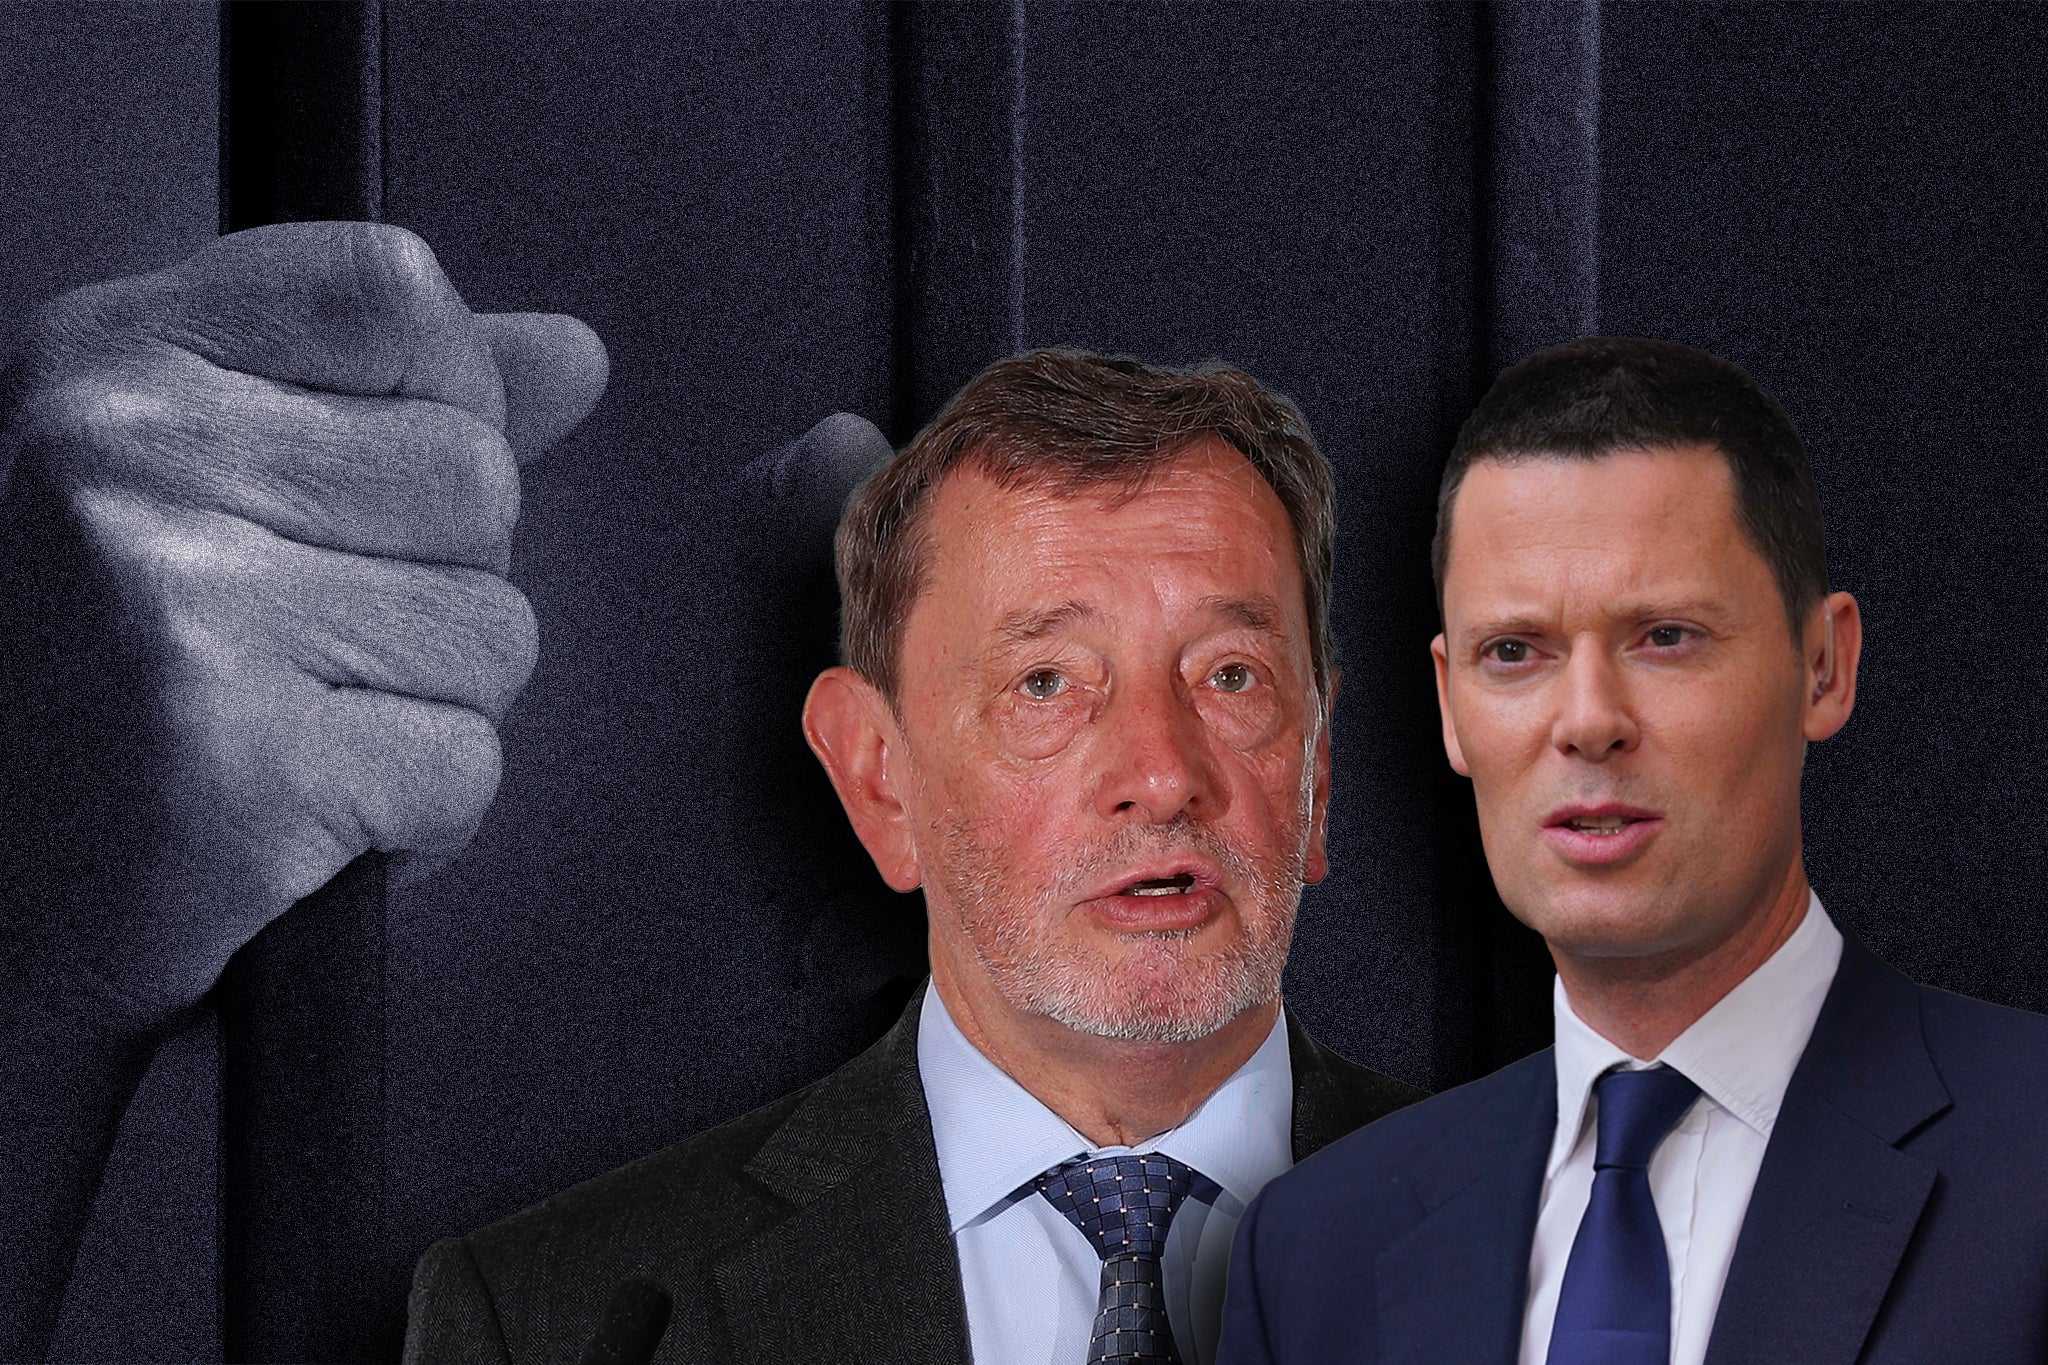 A cross-party group of peers, including David Blunkett, have tabled 17 amendments to help IPP prisoners